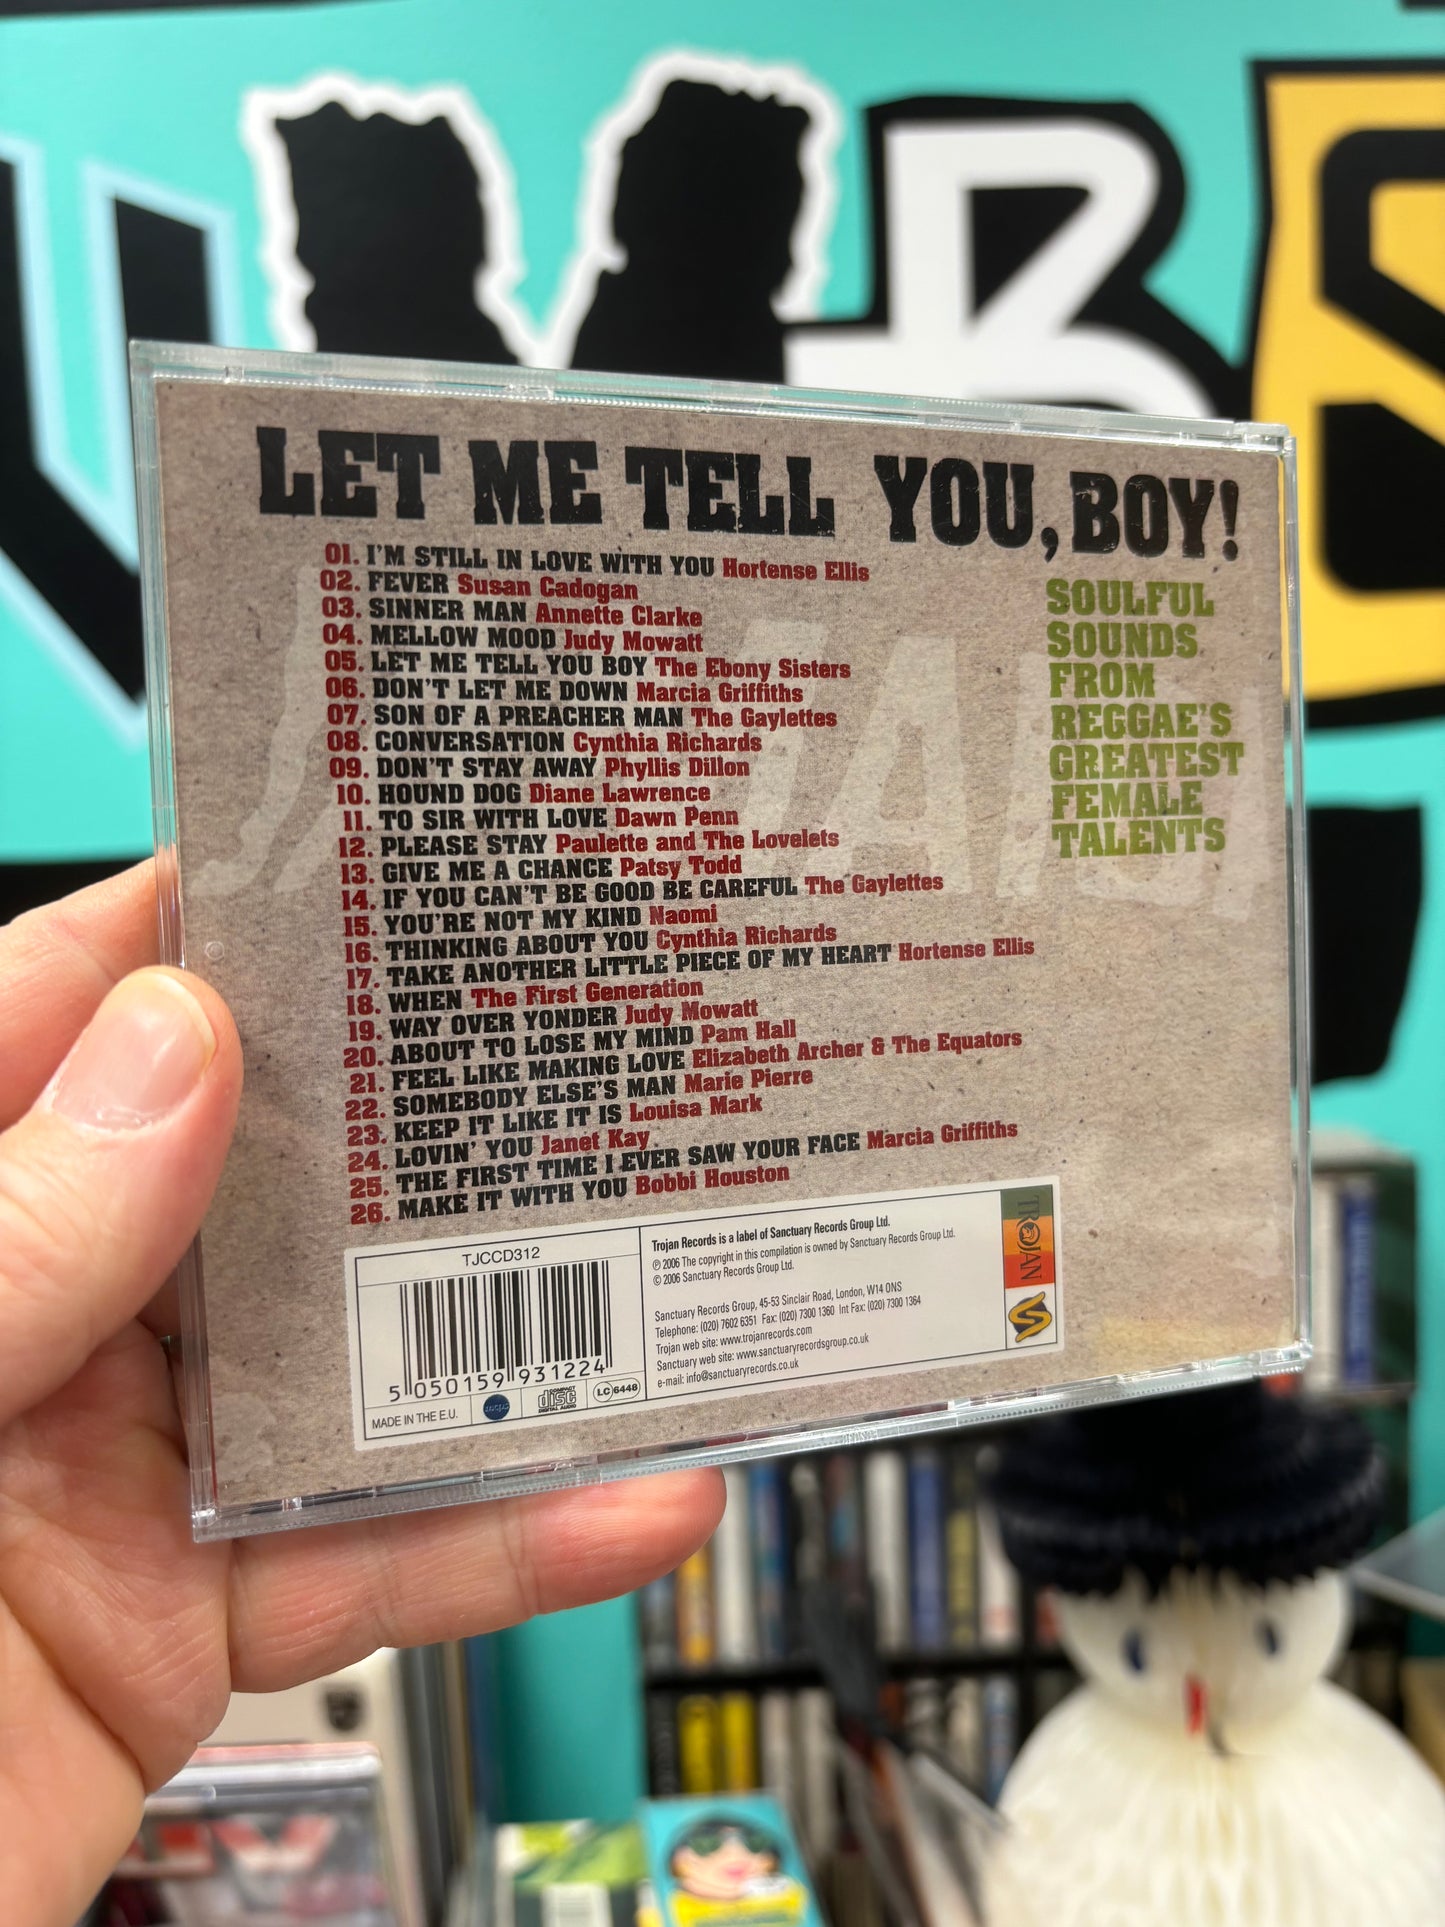 Let Me Tell You, Boy! Soulful Sounds From Reggae’s Greatest Female Talents, CD, Limited Edition, UK 2006